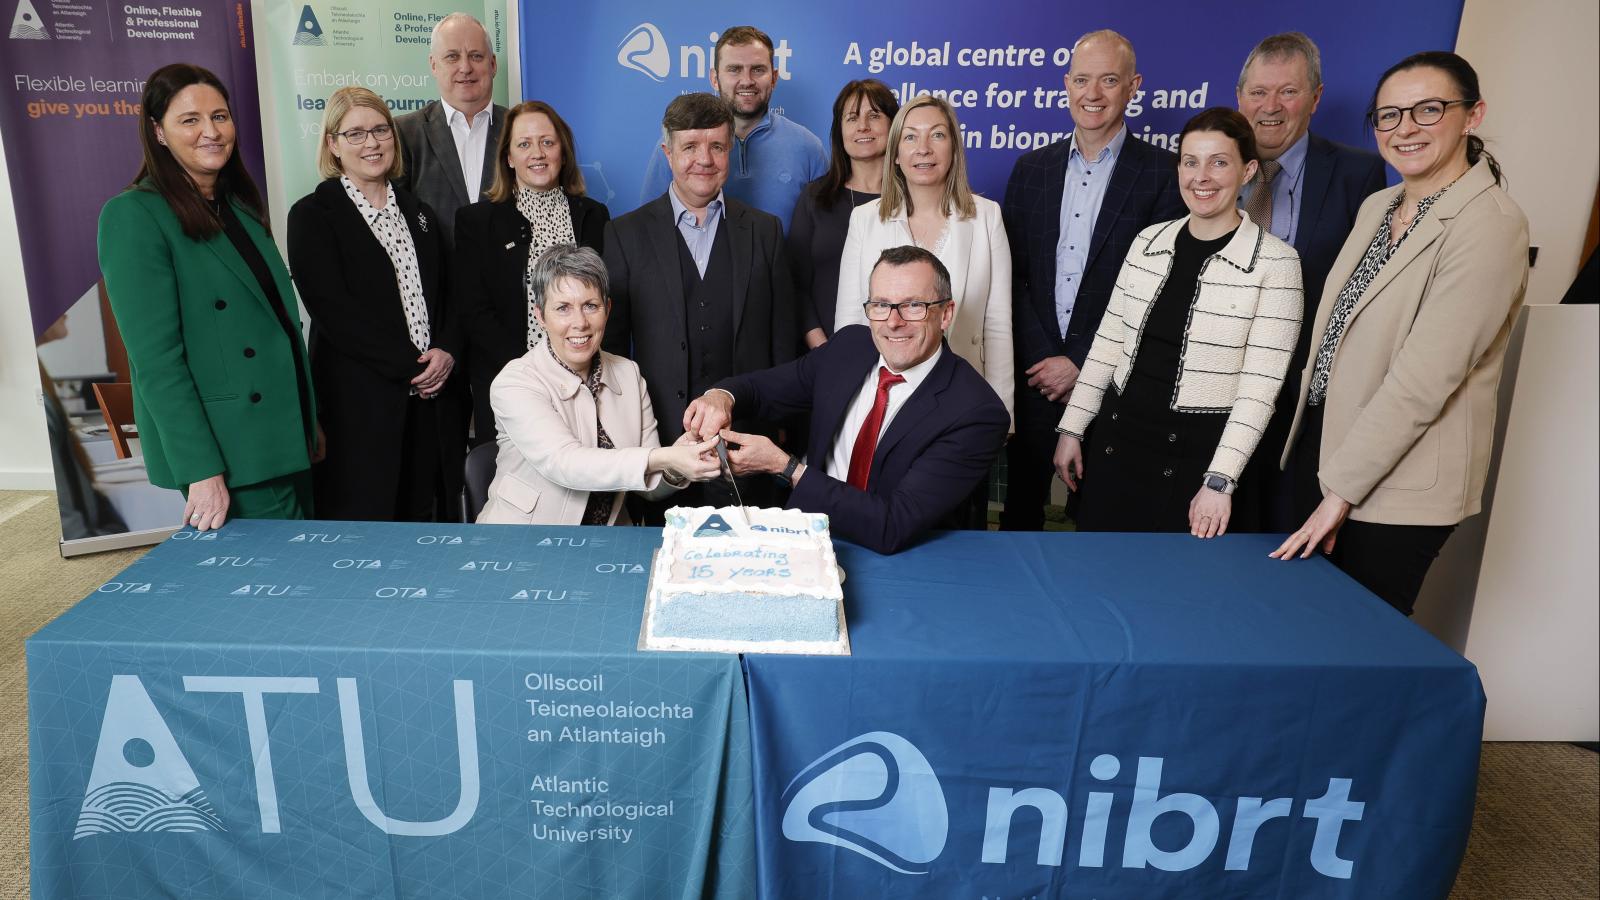  ATU and NIBRT mark 15 years of innovation and growth in Biopharma Education 